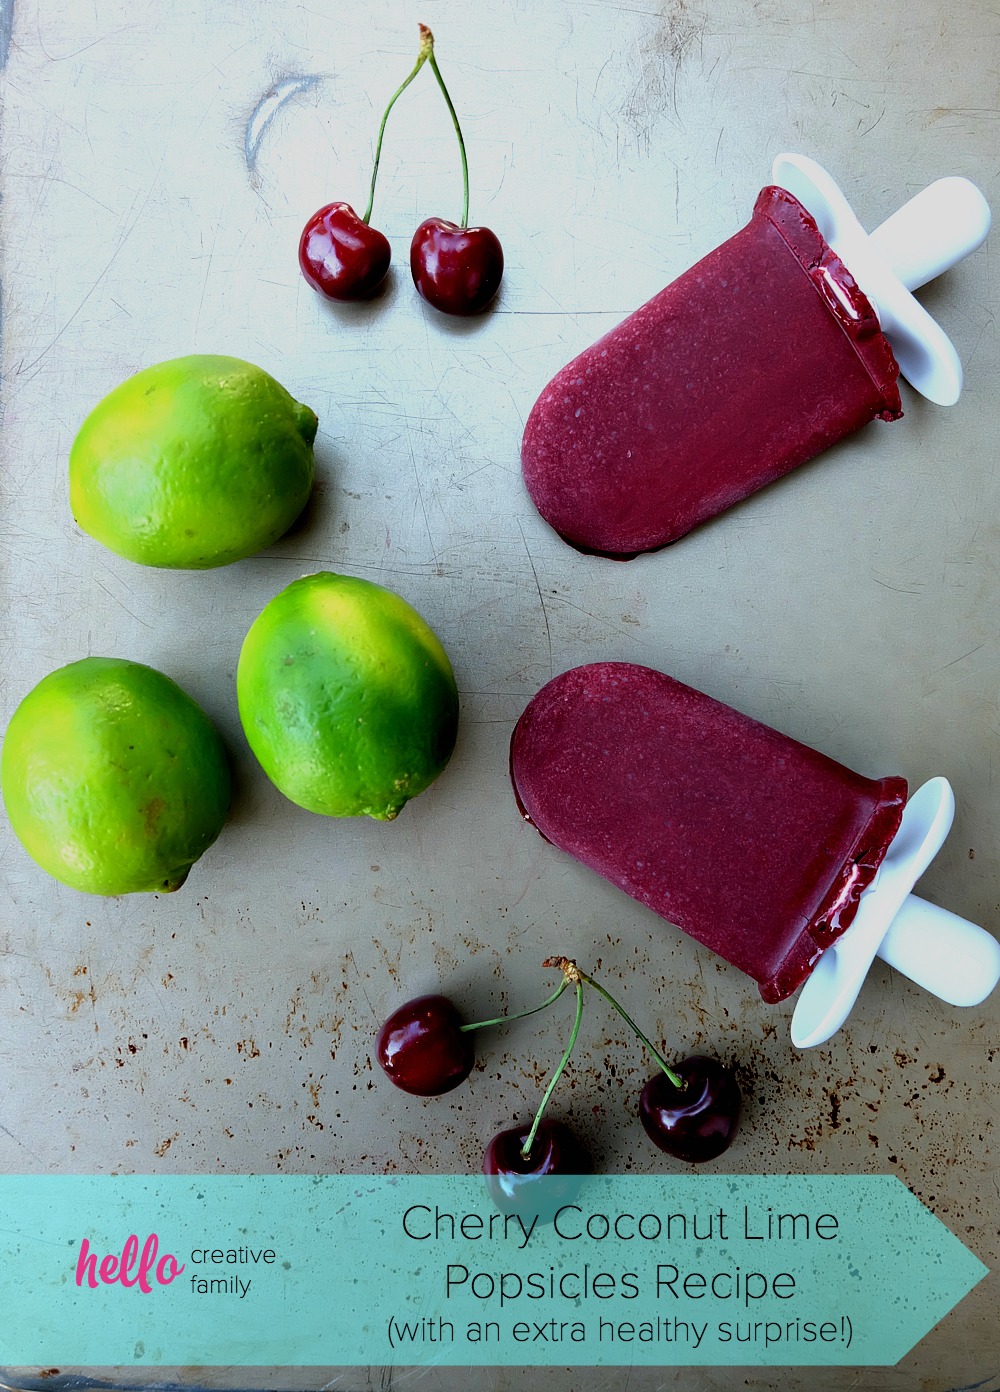 Ice pops are one of my favorite things about summer and this Cherry Coconut Lime Popsicles Recipe does not disappoint! With no added sugar, this recipe is a healthy treat, but it also has an extra special ingredient that ups the health quota! Easy to make, refreshing and a recipe kids and adults will love! 